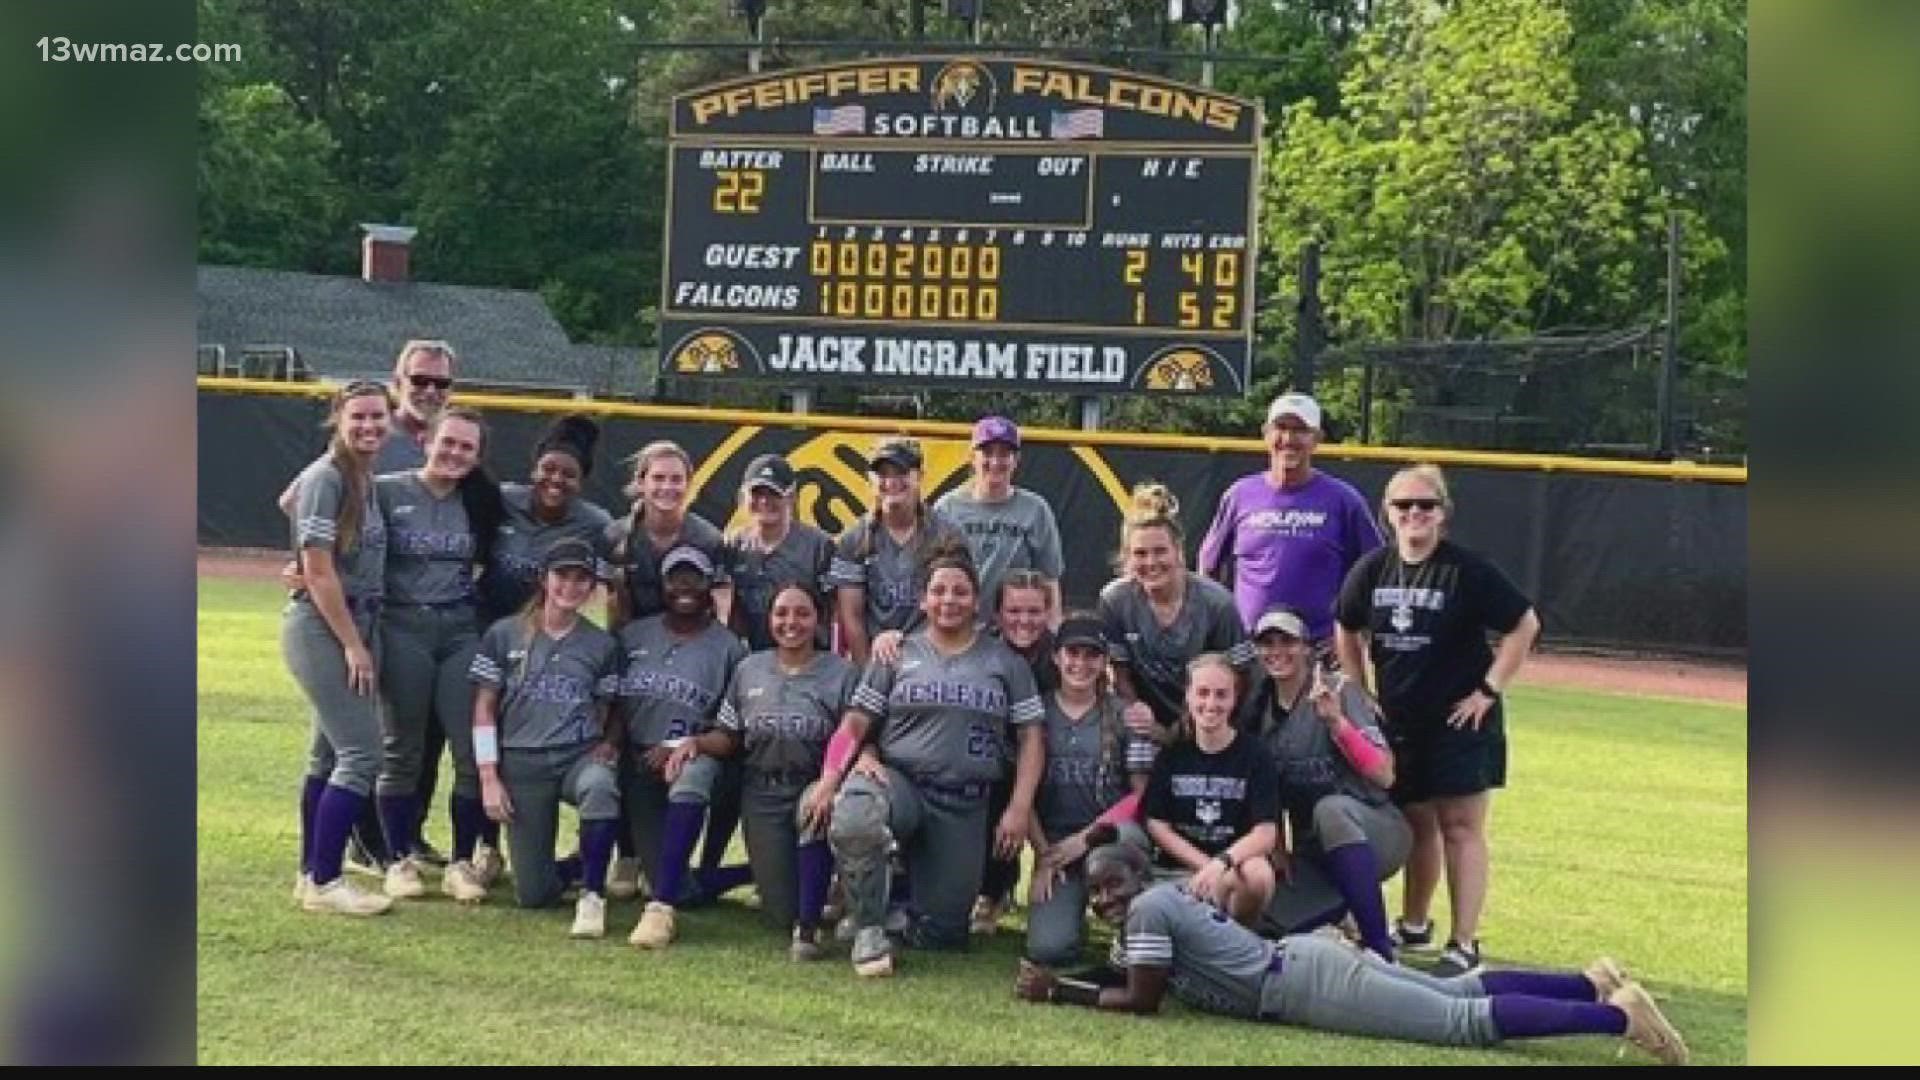 The end of the college softball season is coming to end for the regular season, and one group of Central Georgia diamond divas are making a push for a title.